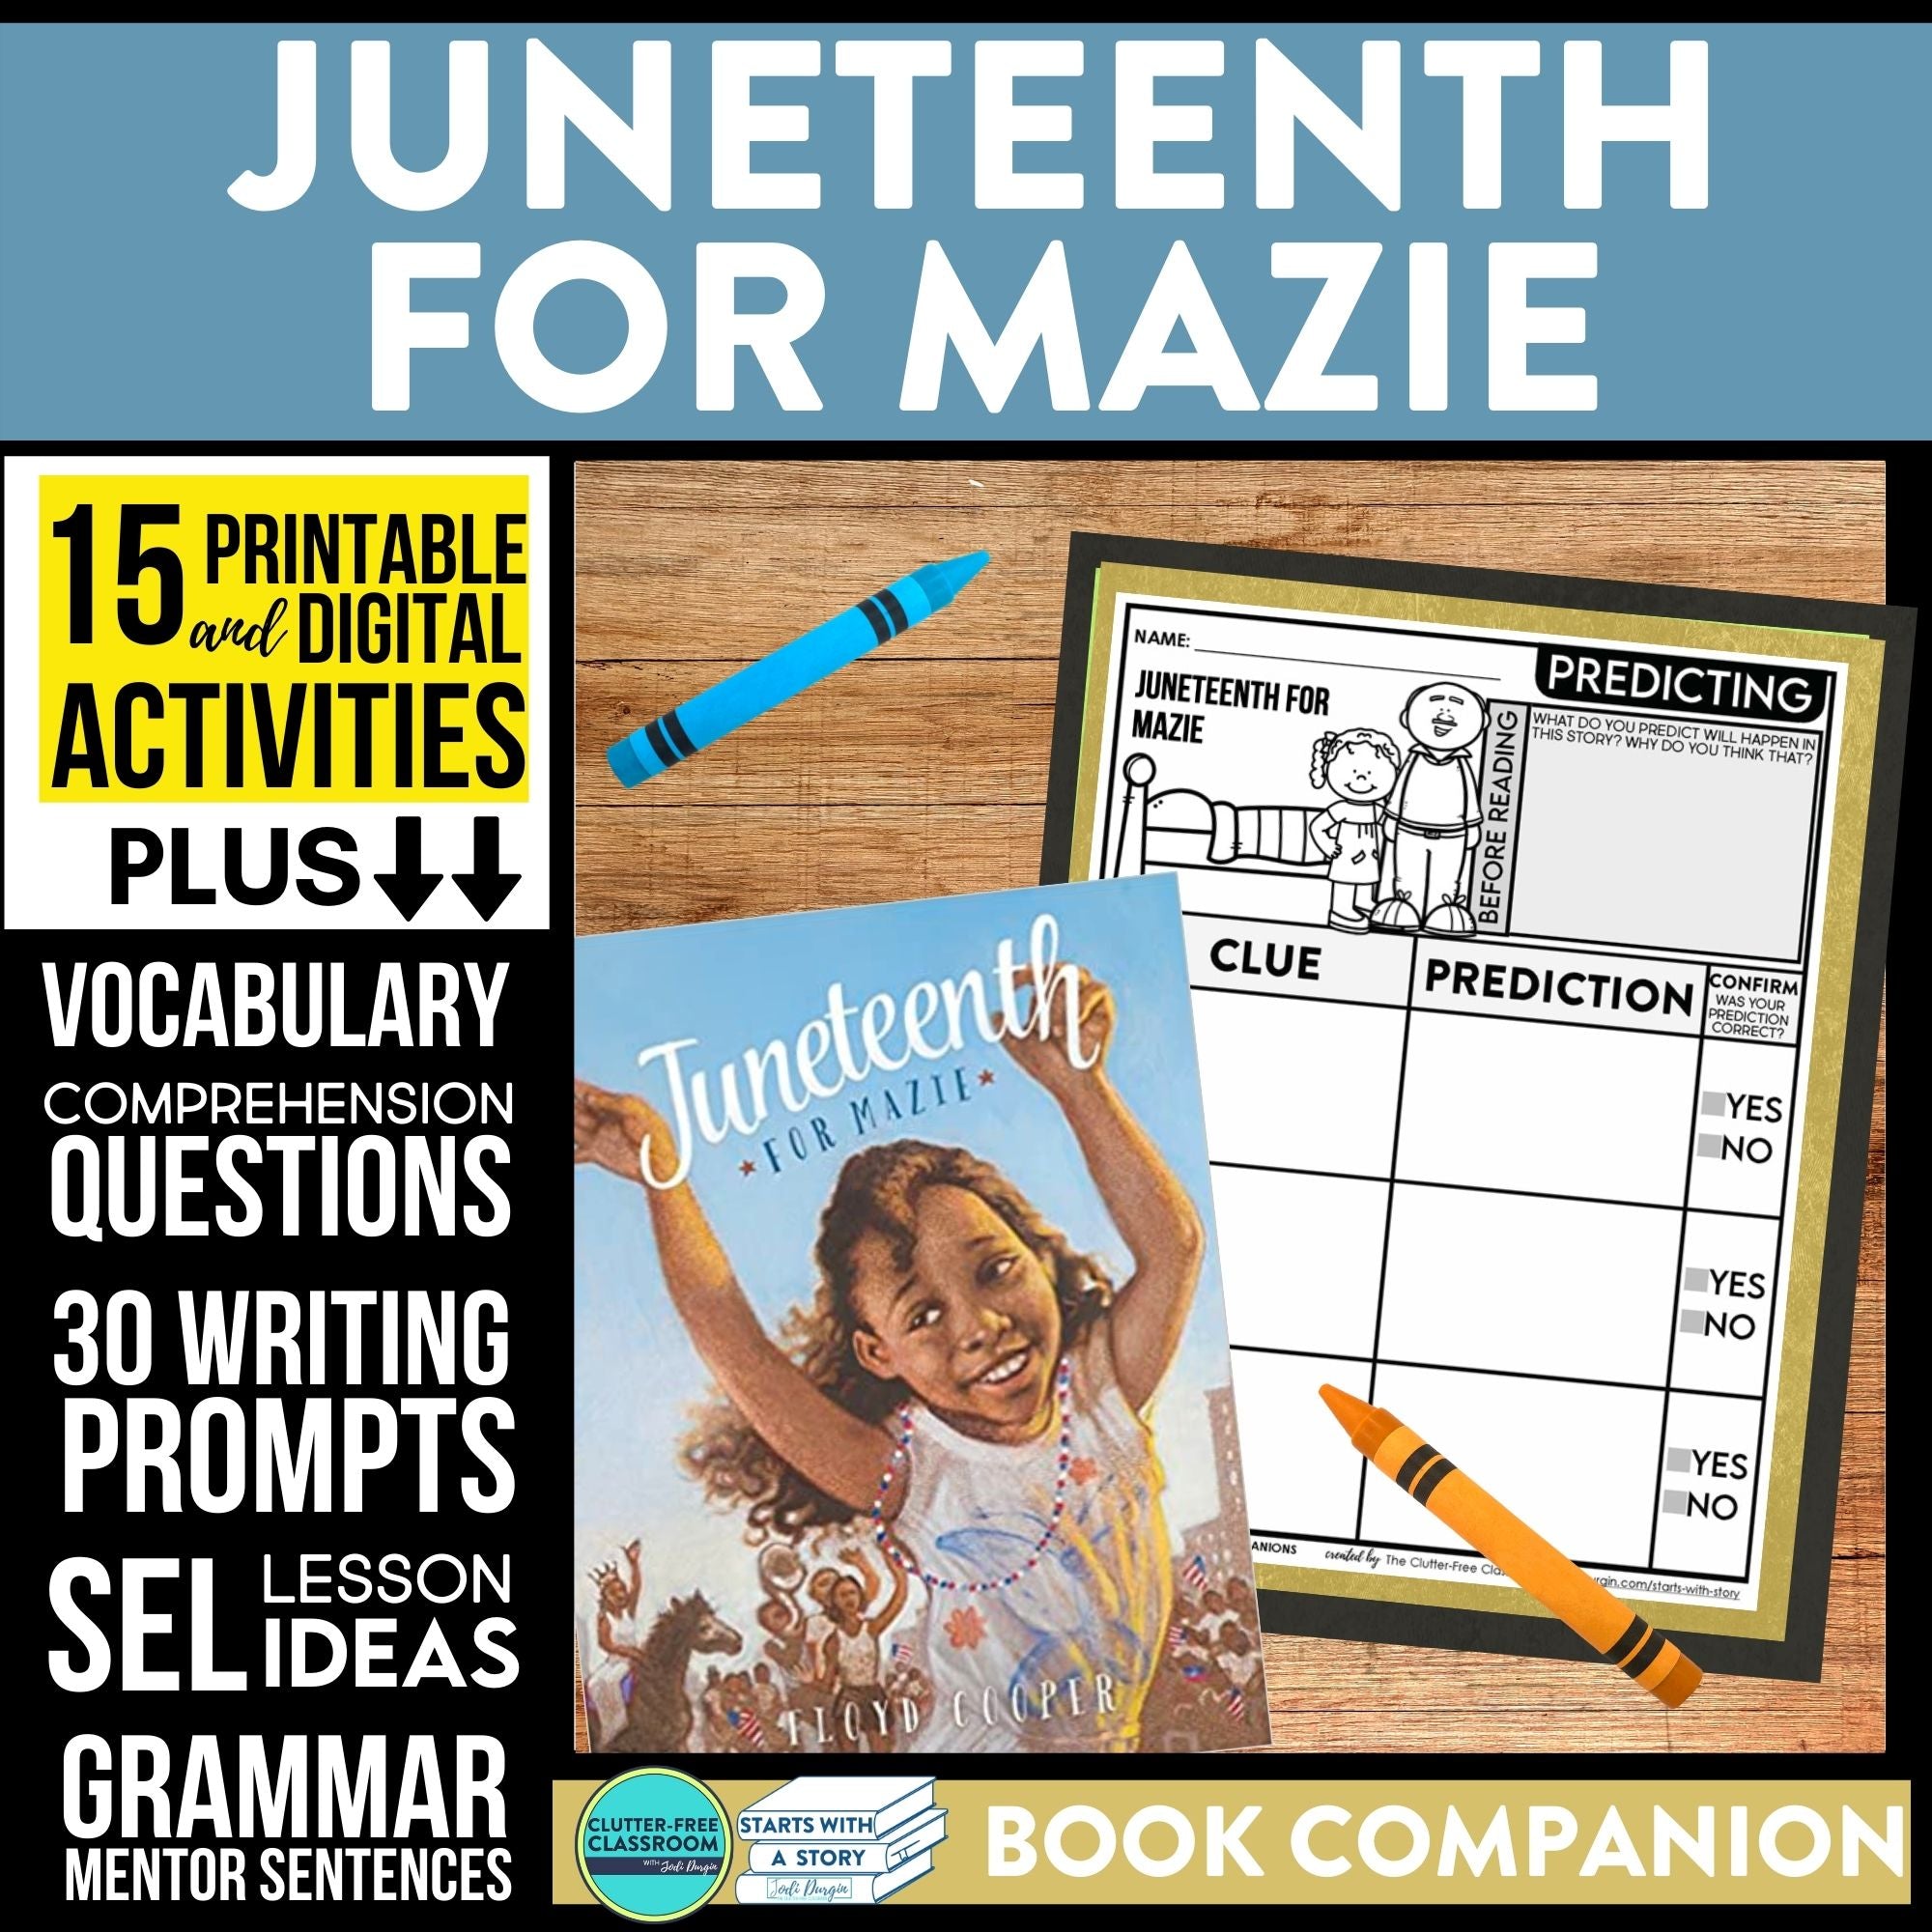 JUNETEENTH FOR MAZIE activities and lesson plan ideas